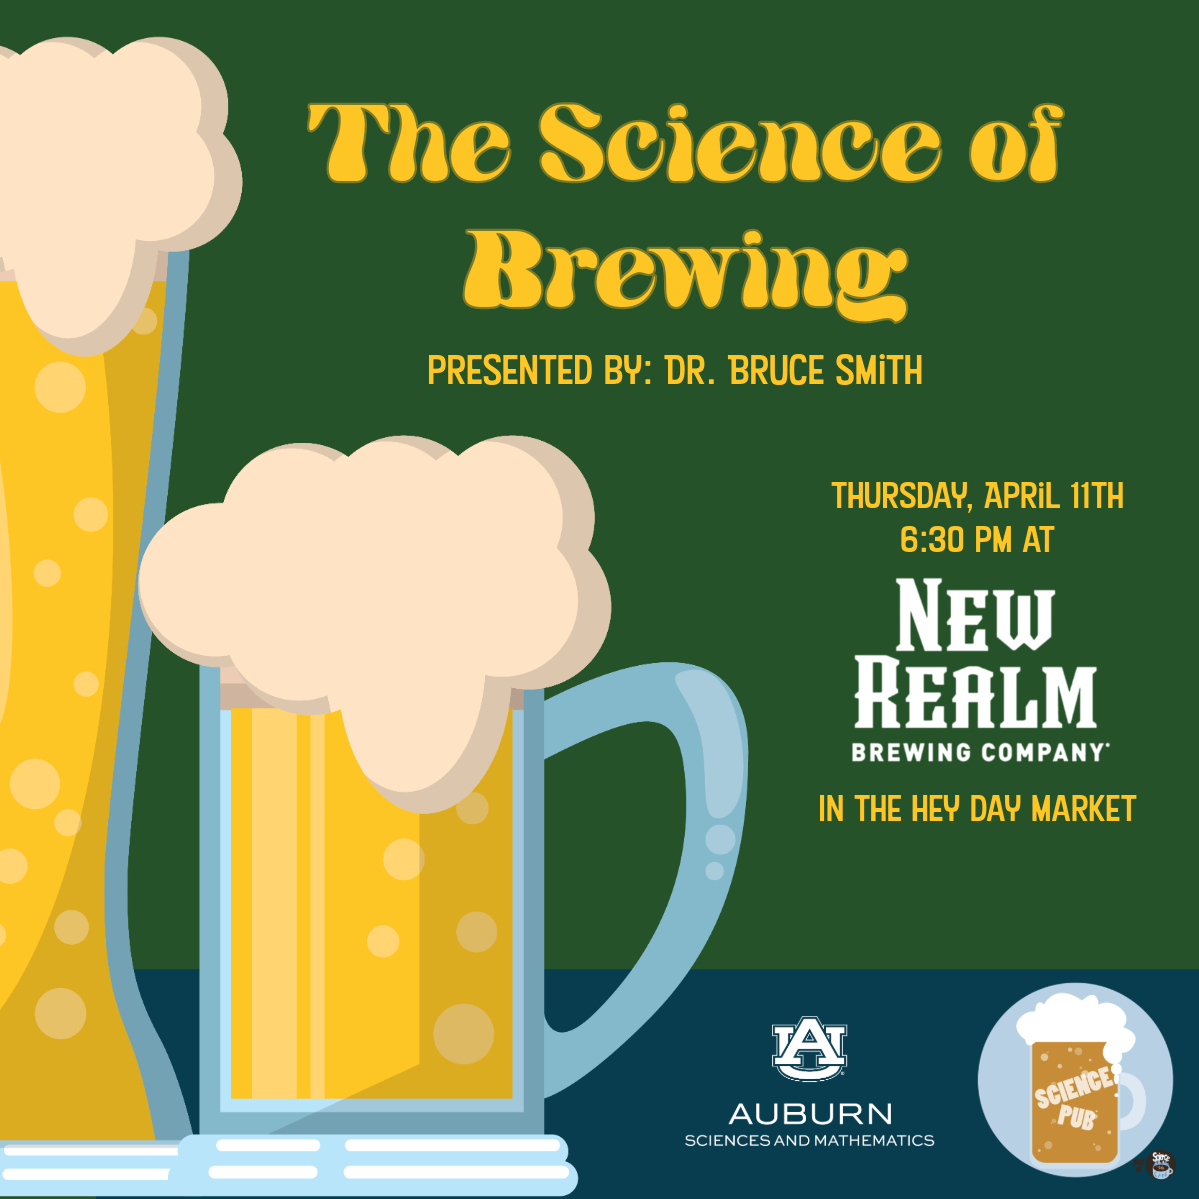 Join us for the Science of Brewing on April 11 at the New Realm Brewing Company Hey Day Market